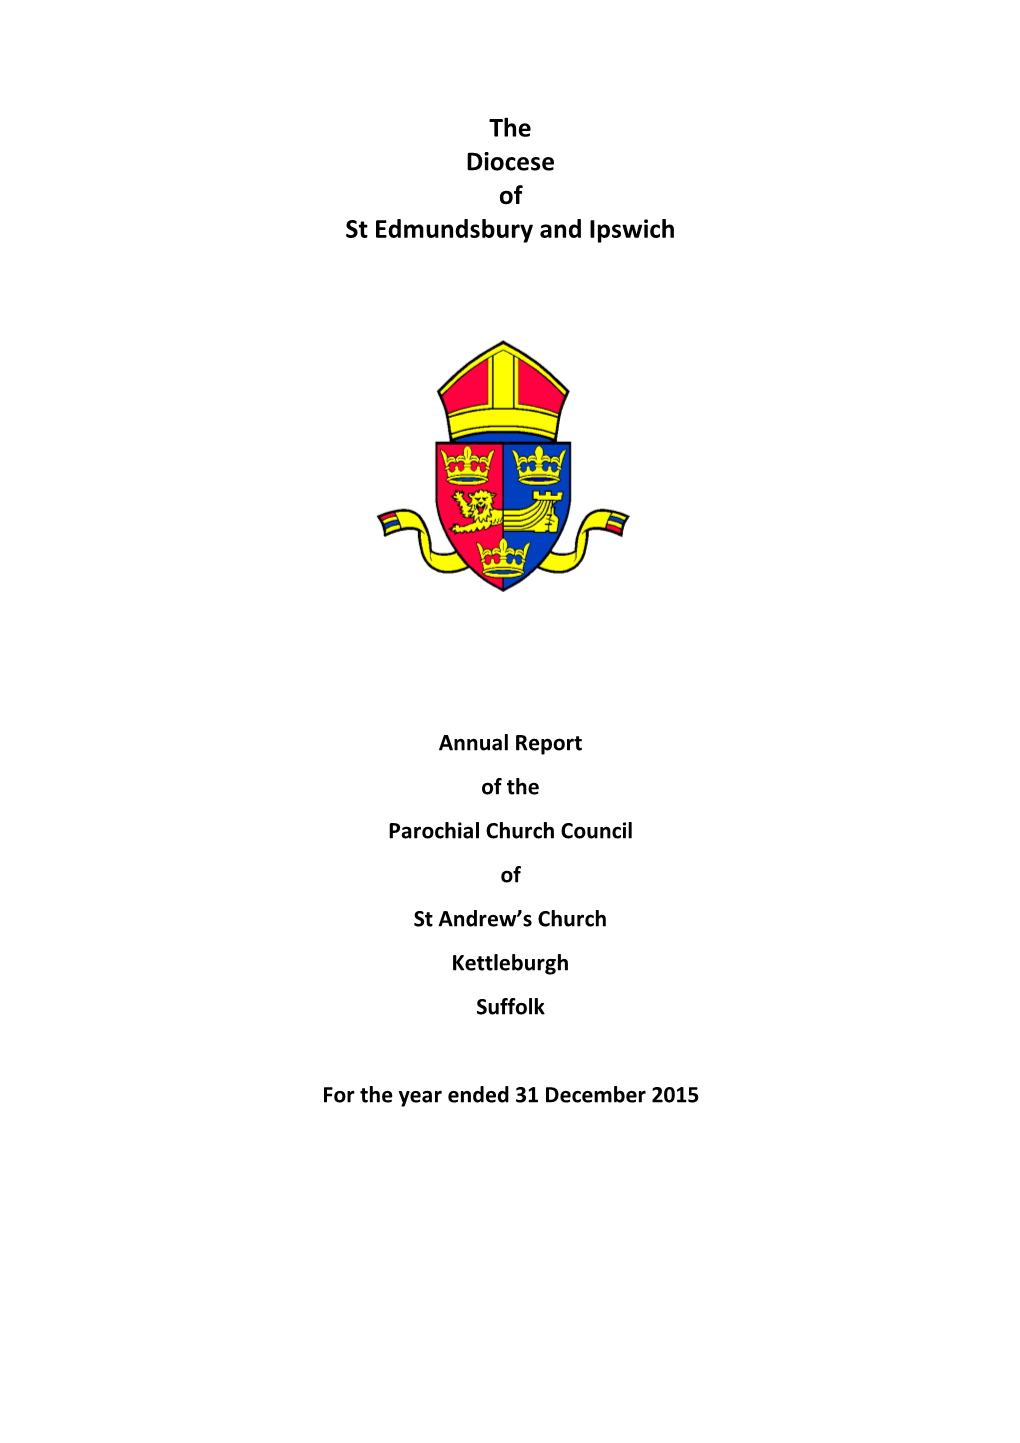 The Diocese of St Edmundsbury and Ipswich